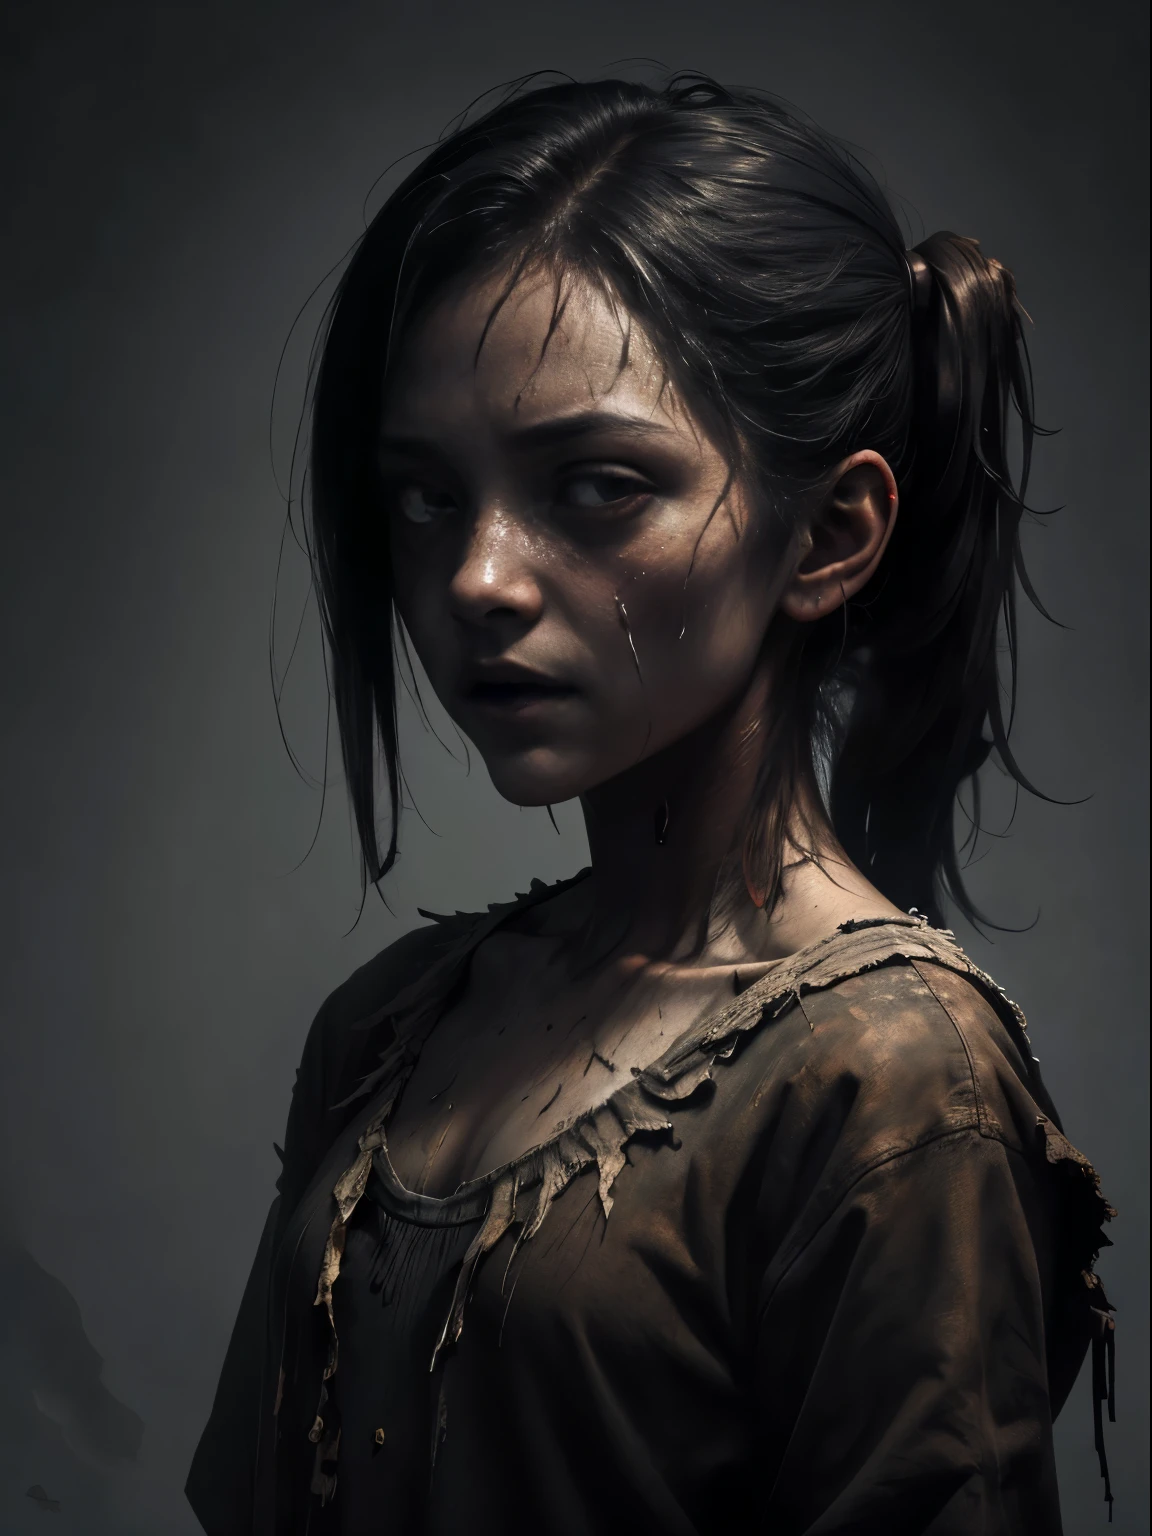 A haunting portrait of a school girl with a face that reflects the horrors of the undead, zombie, empty eyes, Focus on realism and intricate details to capture the unsettling nature of her appearance. Depict her lifeless eyes, decaying skin, and disheveled  in vivid and precise detail, using shading and textures to bring the image to life. Upper body shot